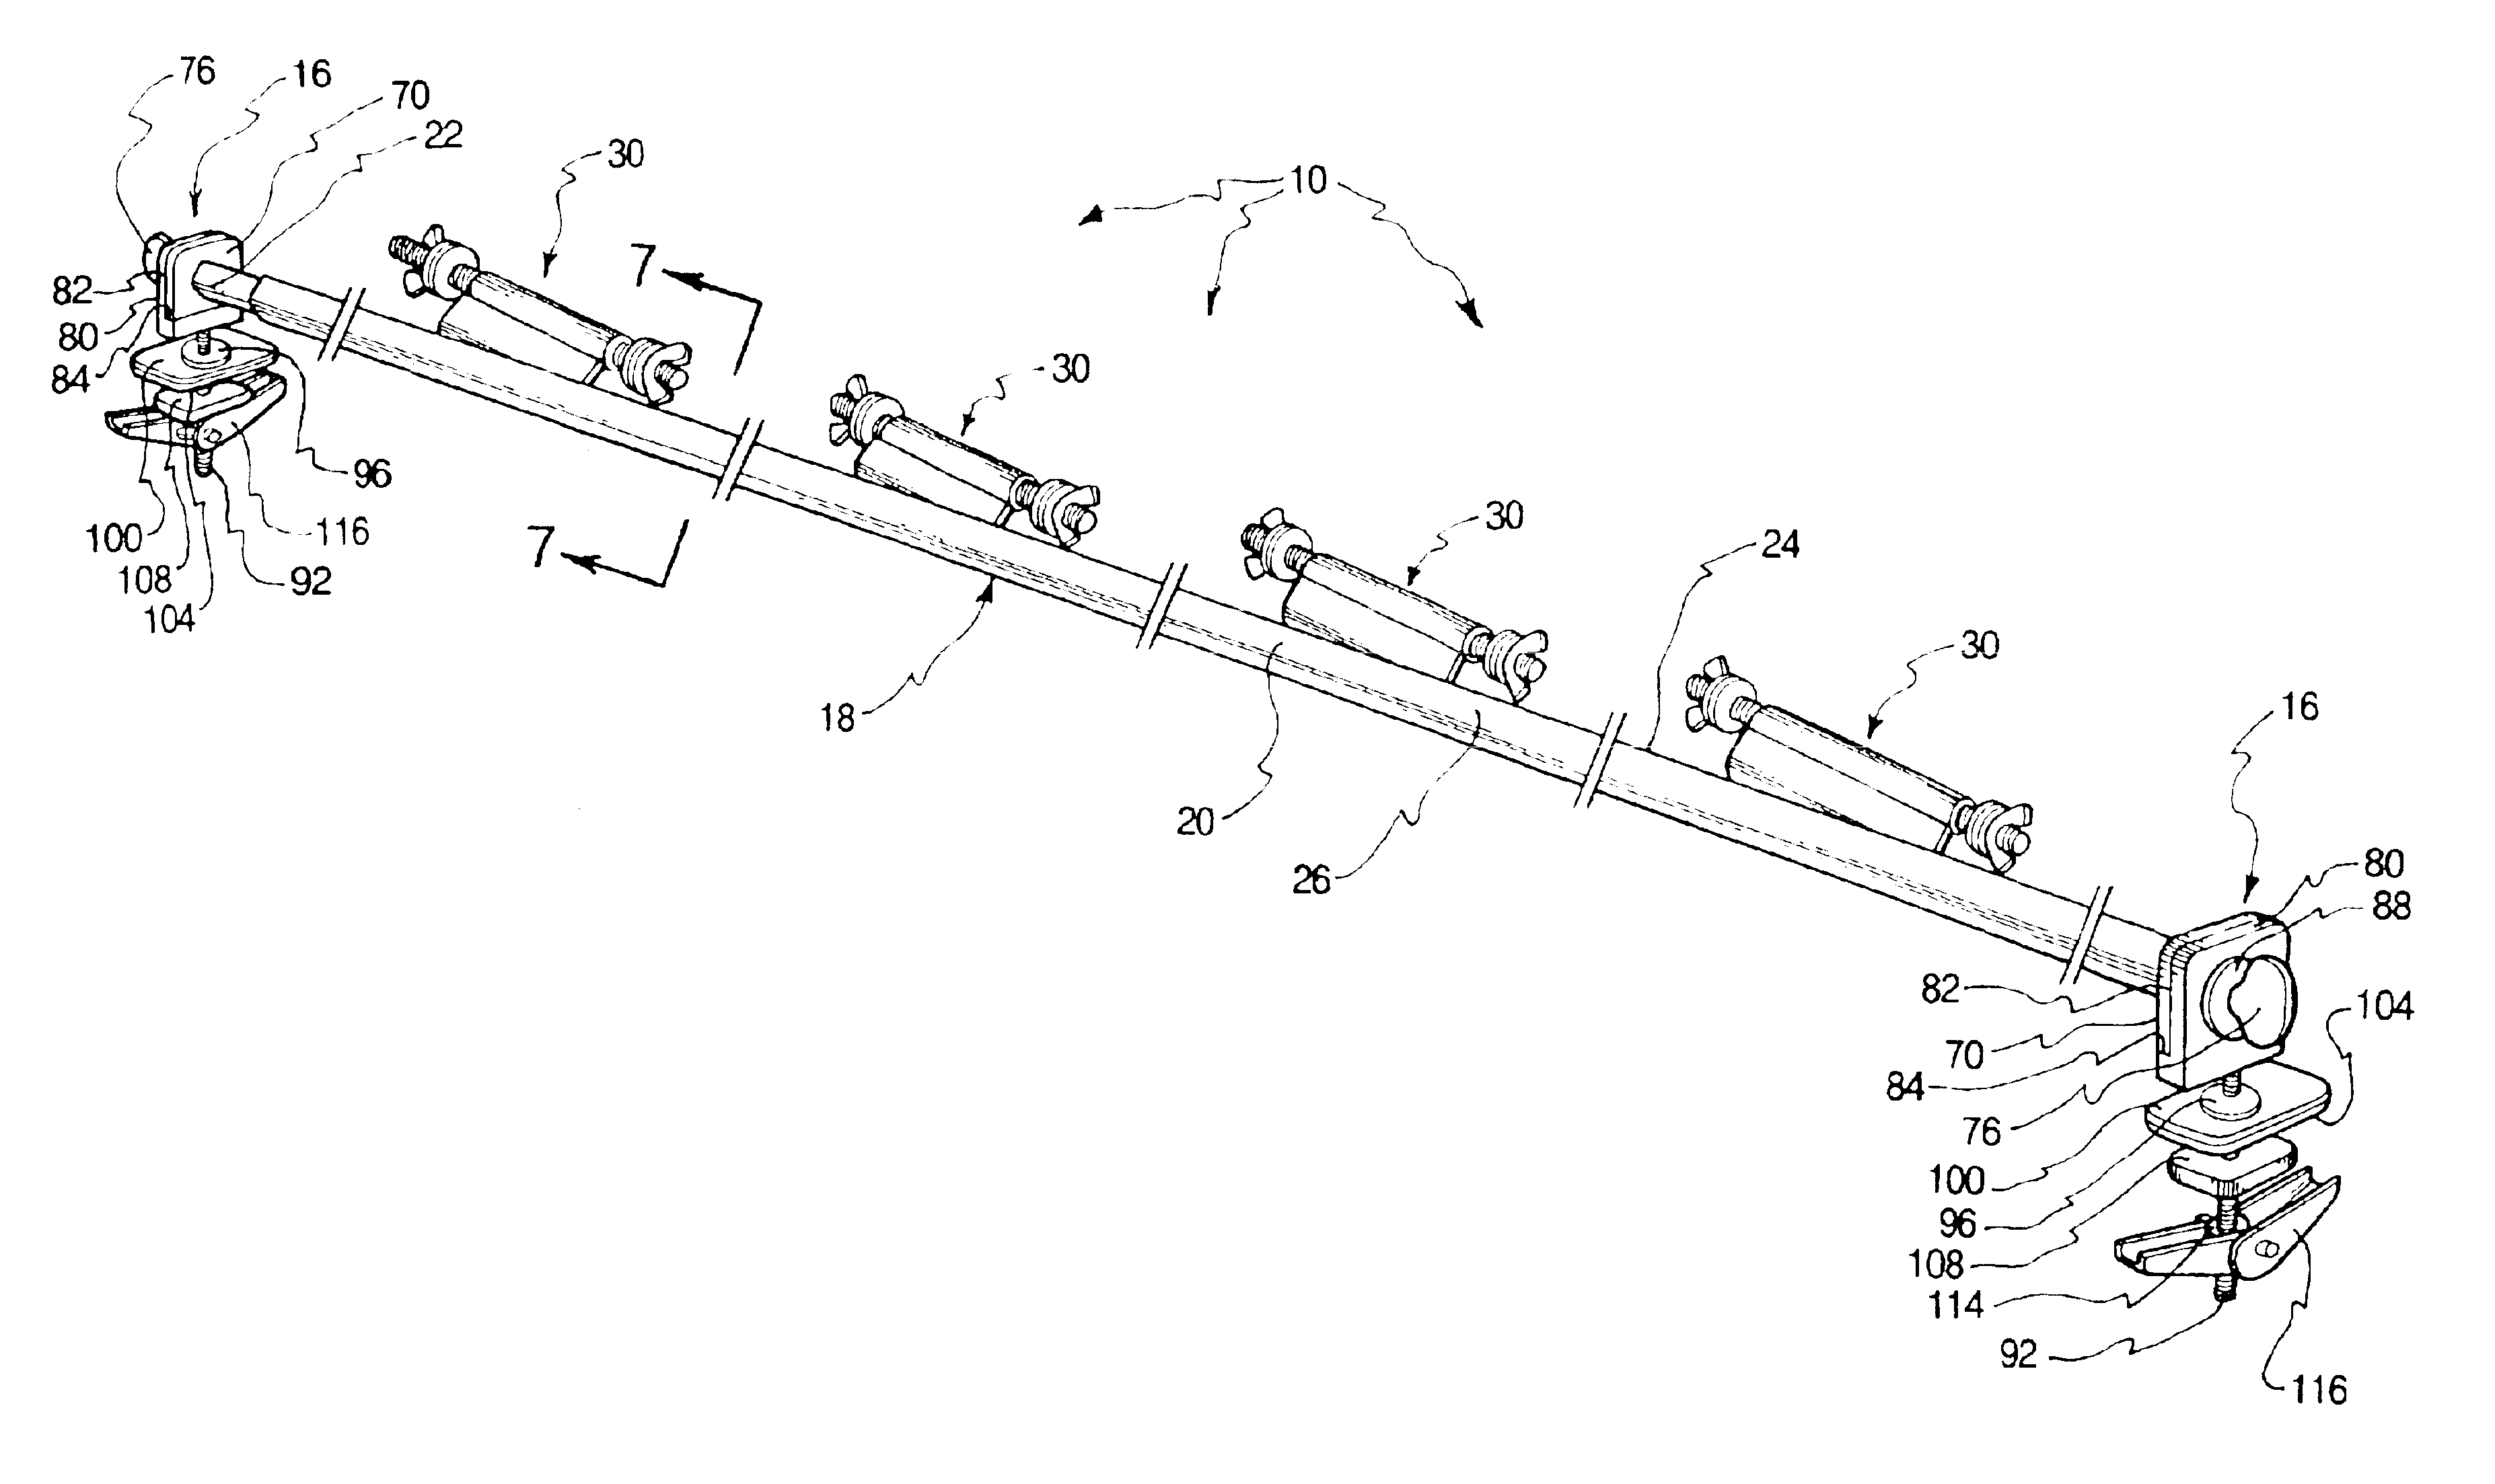 Pickup bed racks for bicycles and methods